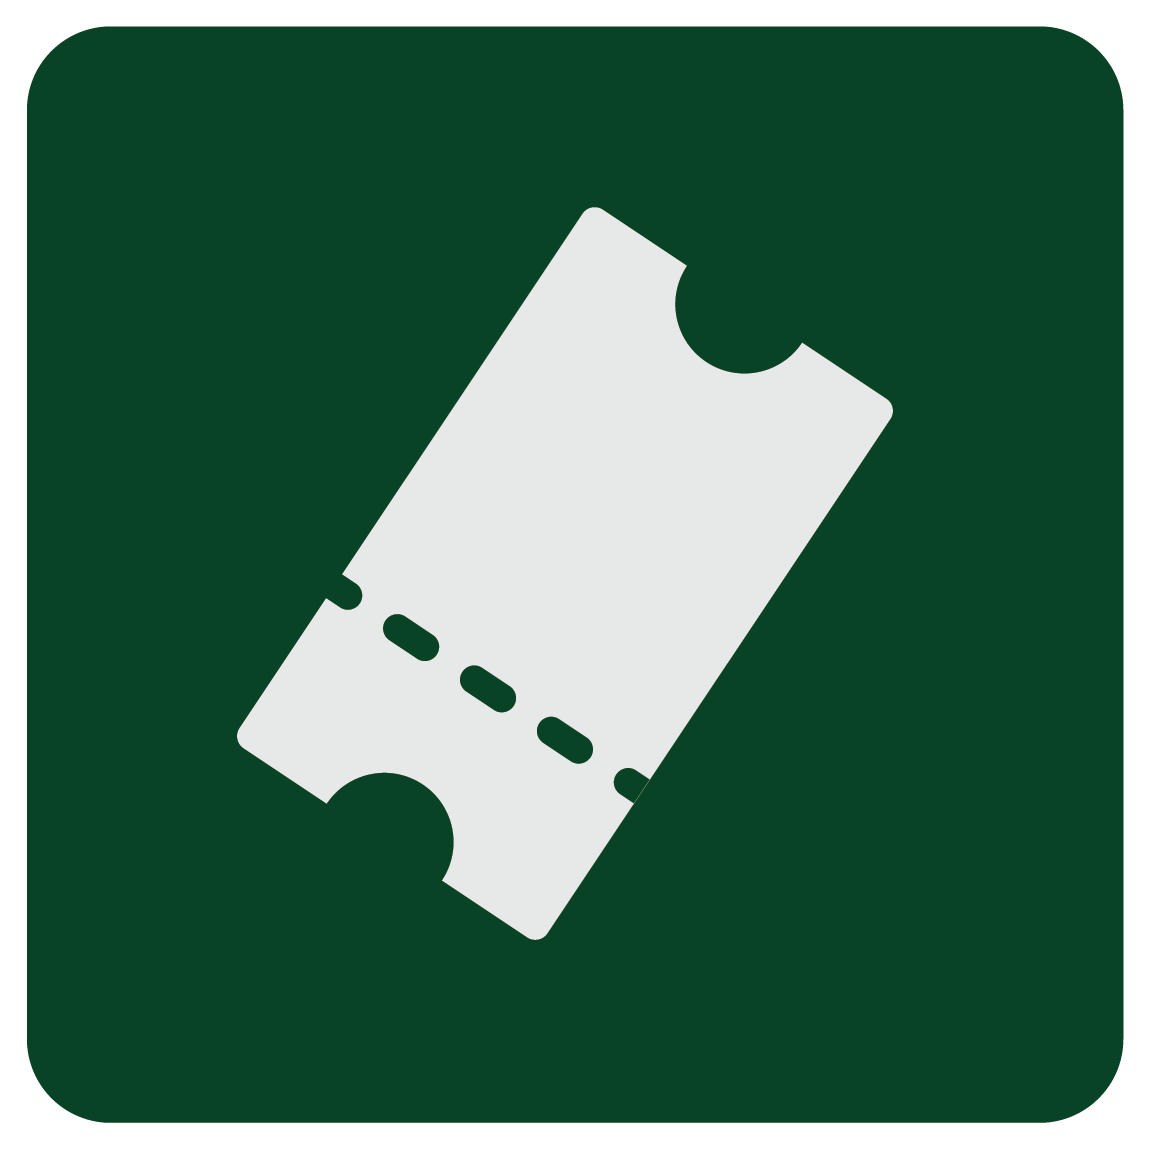 A white ticket icon on a green background.